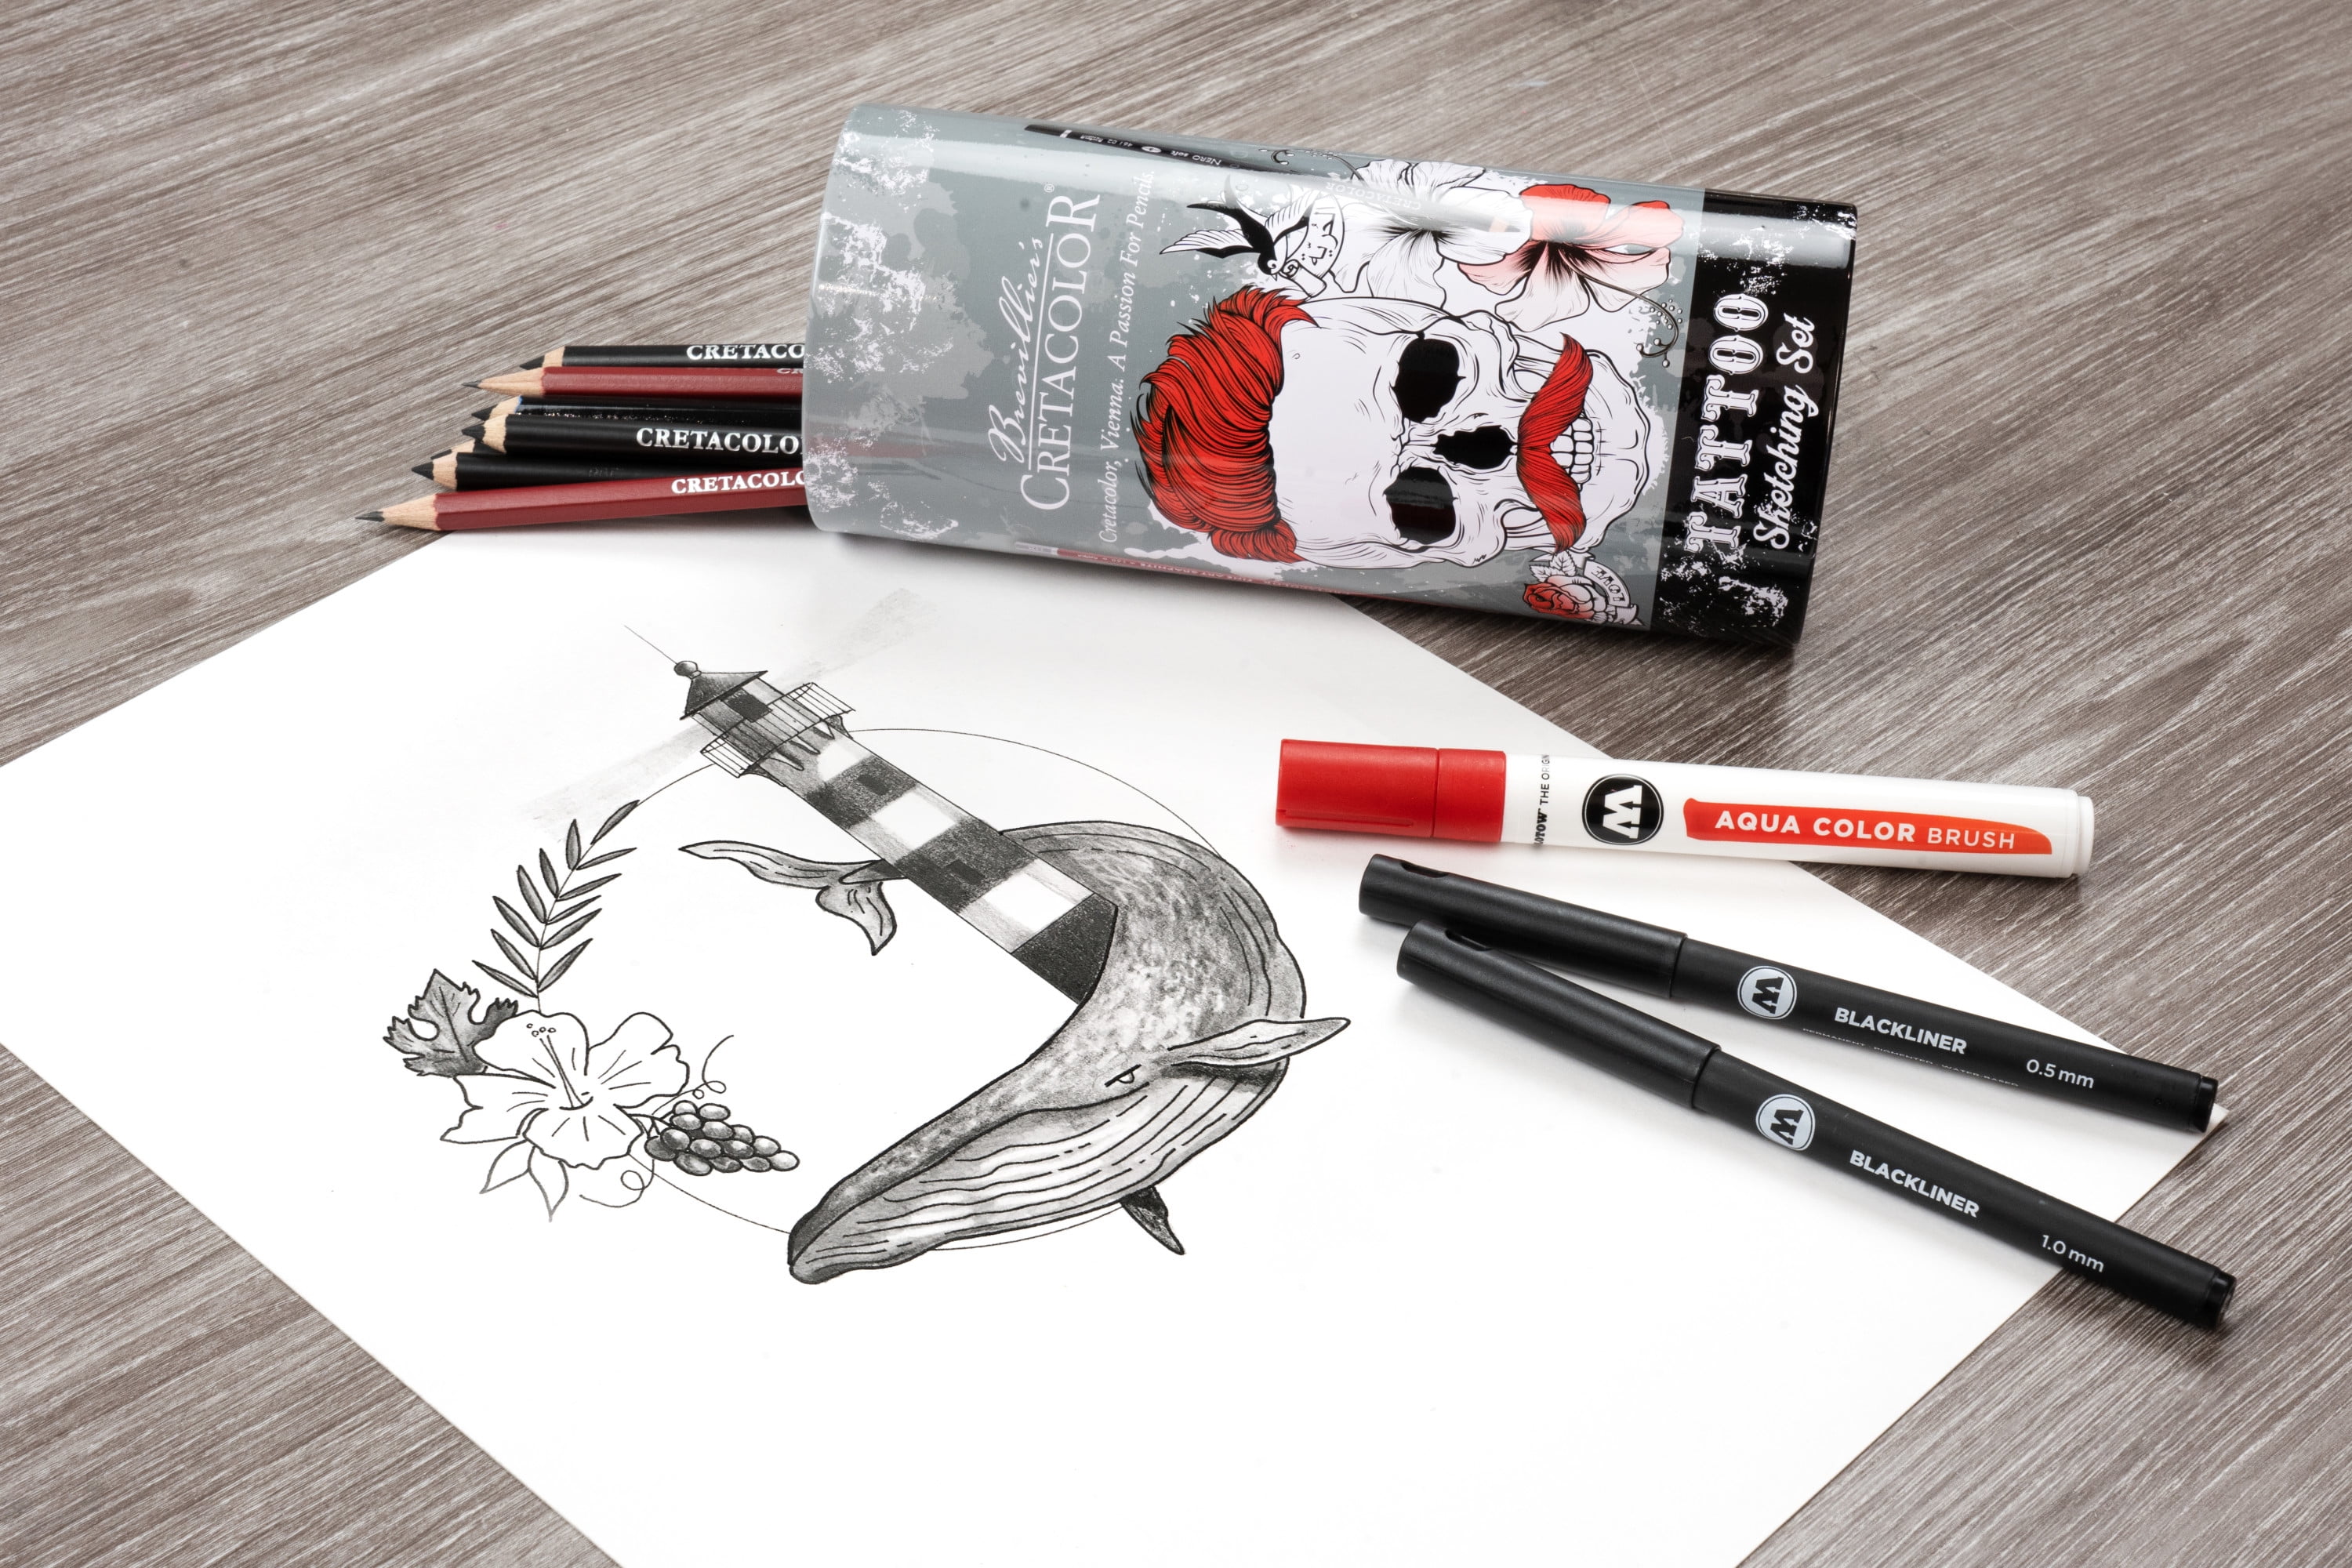 How to use Cretacolor's SKETCHING Set, Easy drawing TUTORIAL